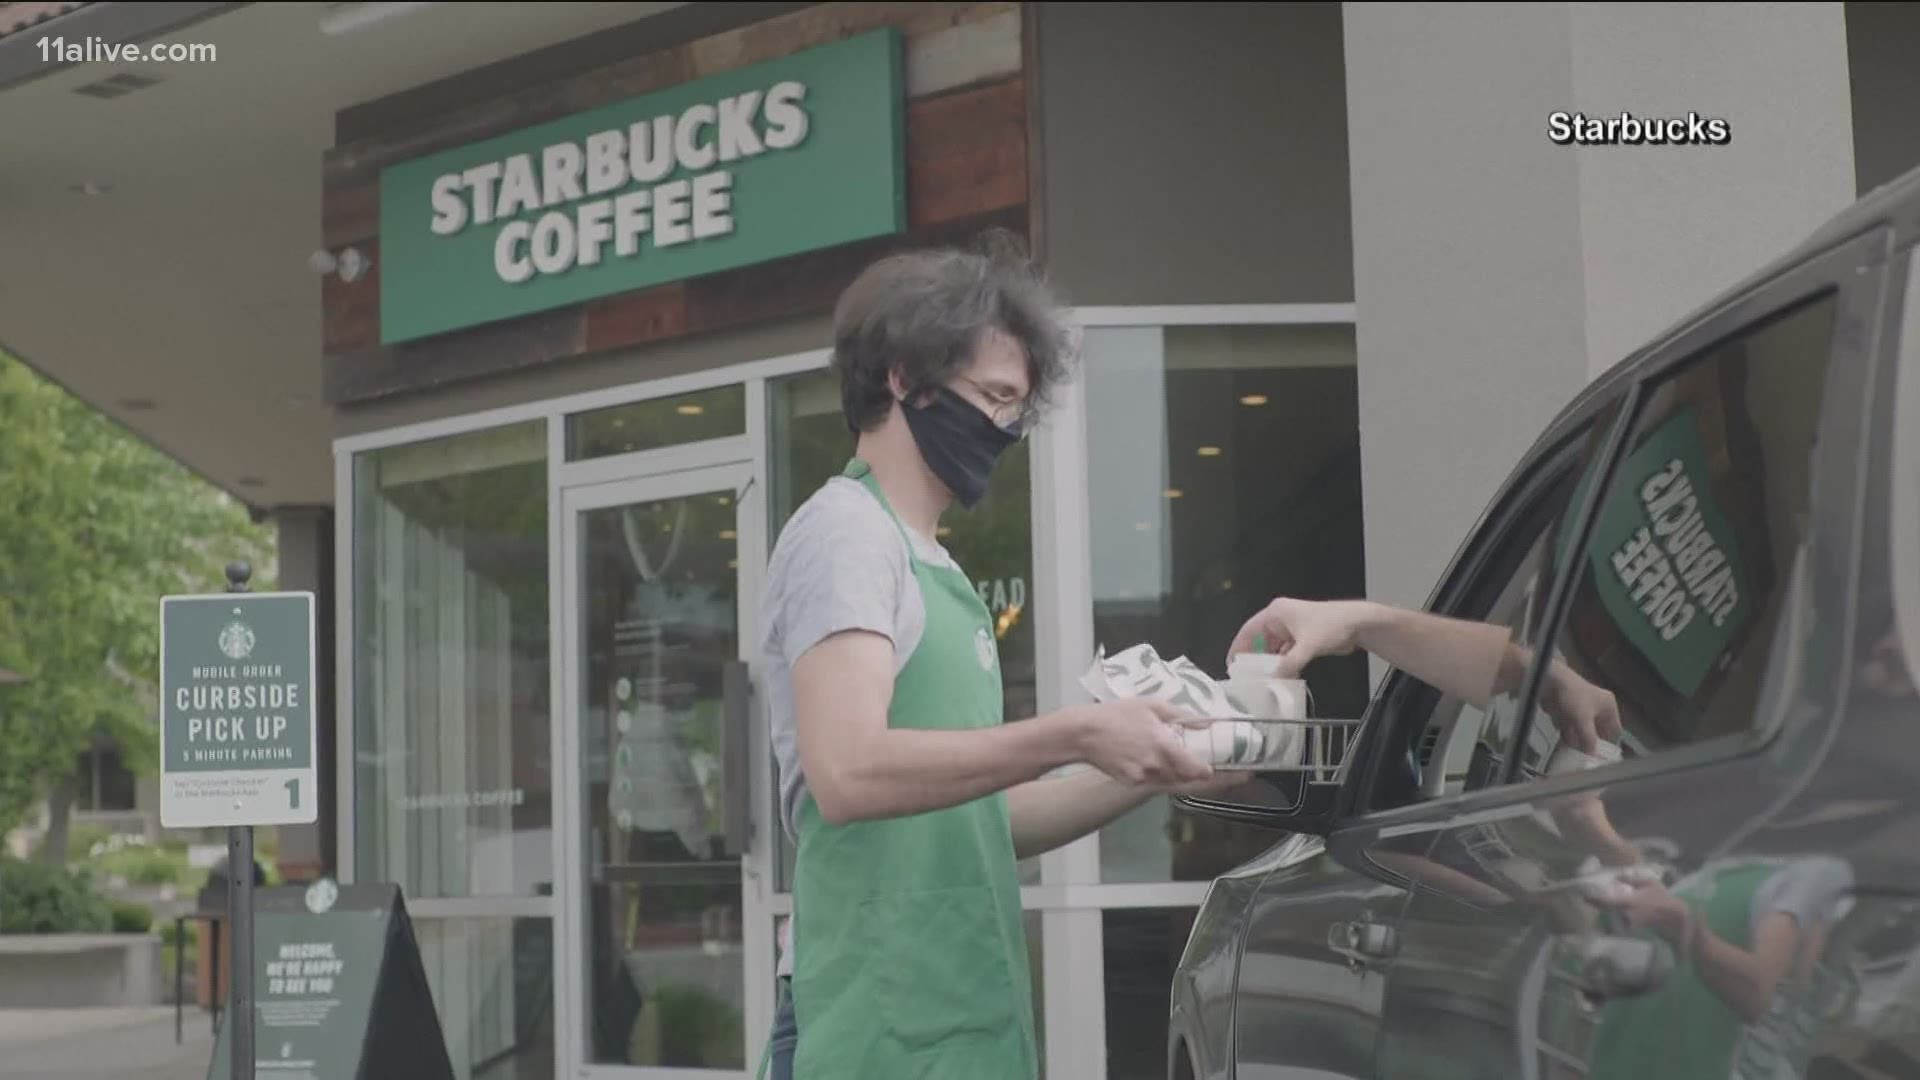 The major coffee chain says those who don't wish to wear a mask still have options to get coffee from their stores.